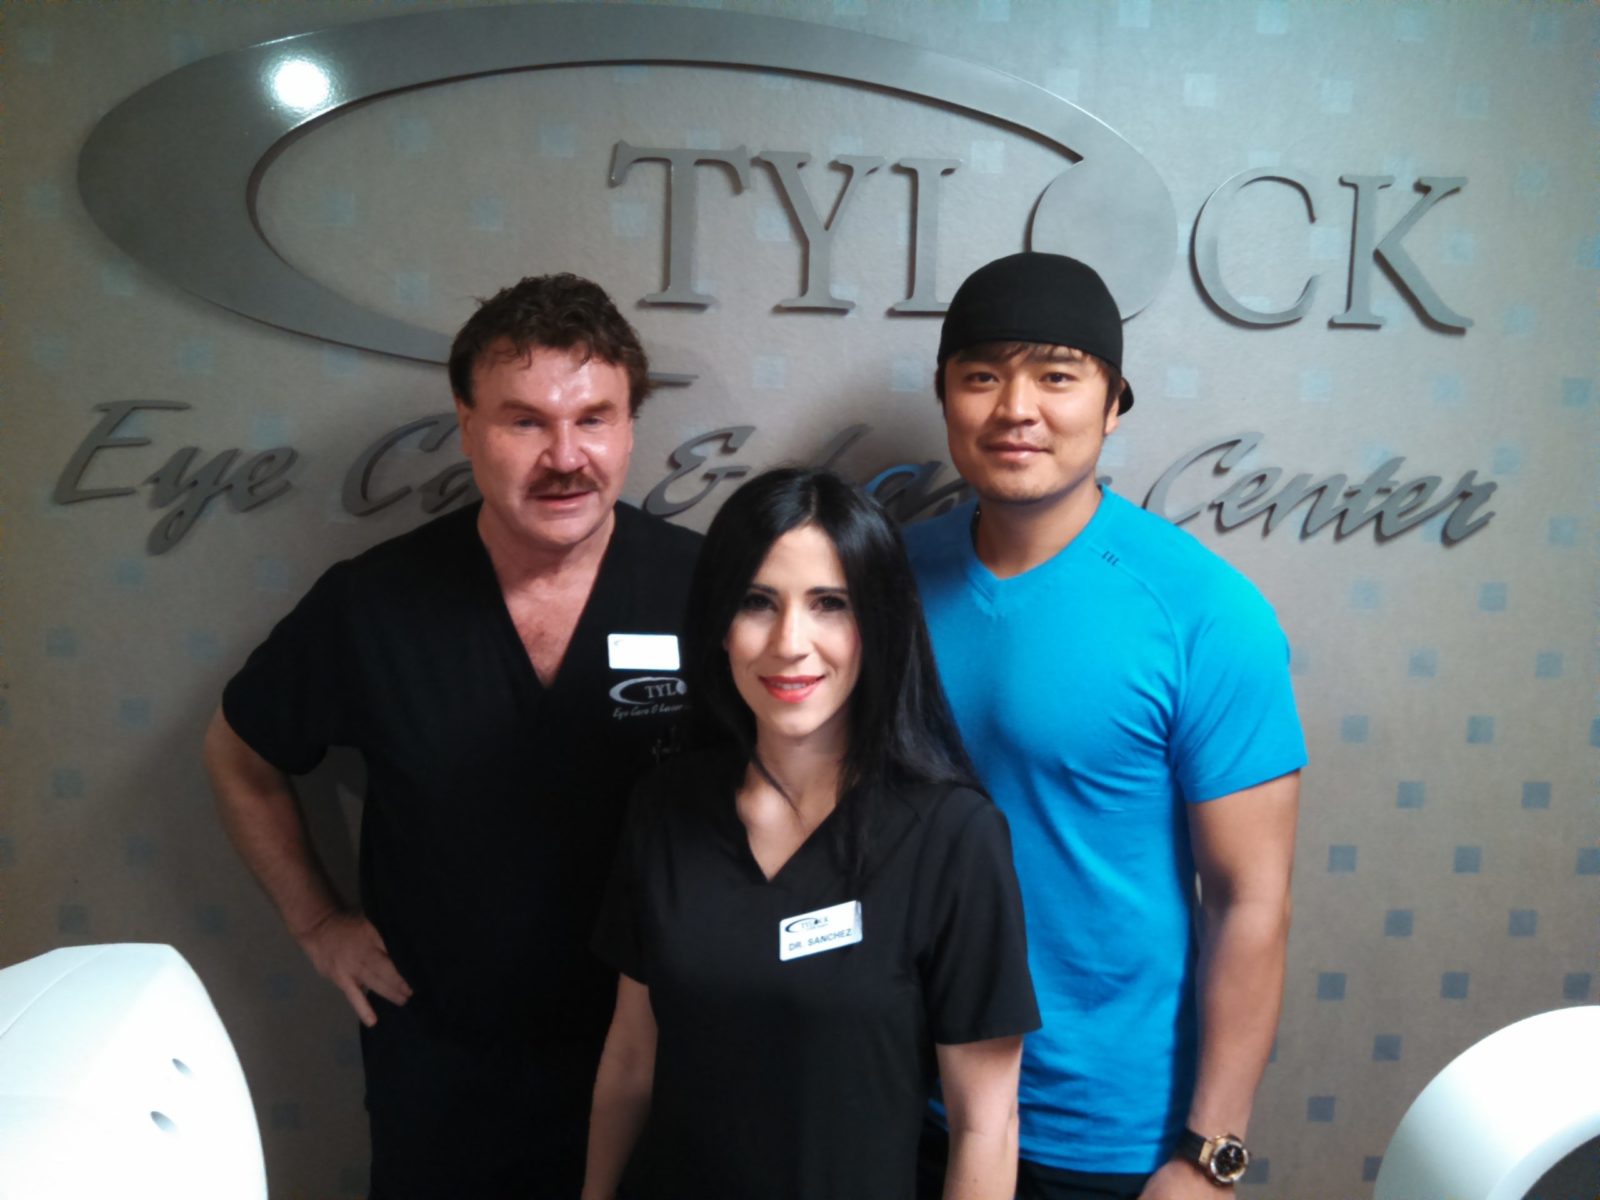 Dr. Sanchez with Dr. Tylock and Shin-Soo Choo